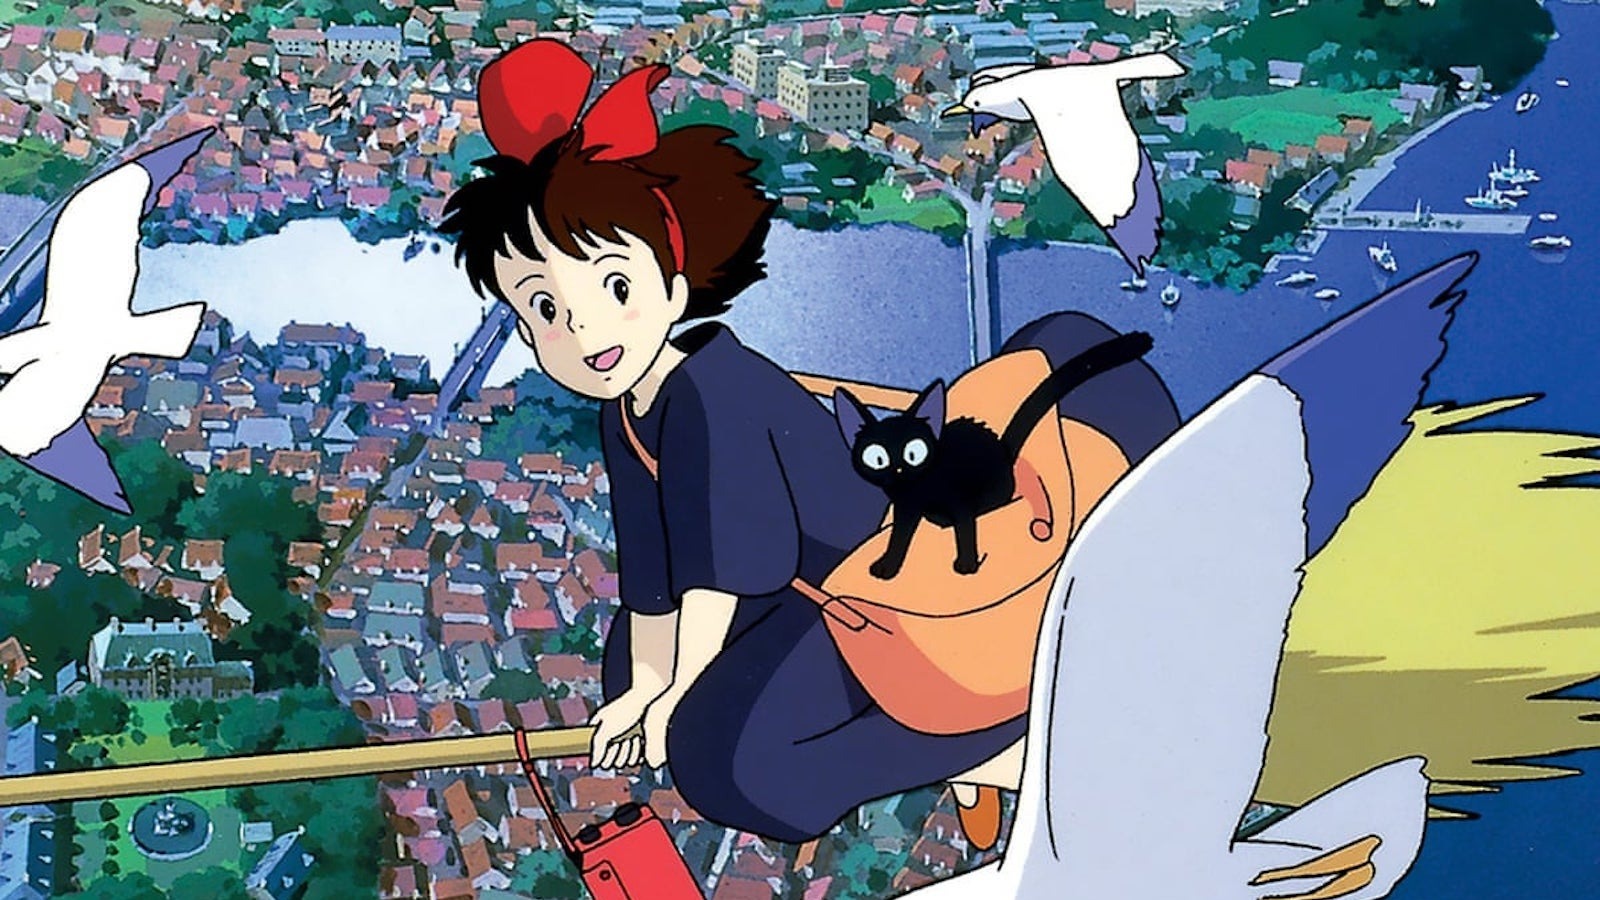 Brief Thoughts: Kiki's Delivery Service – Headspace